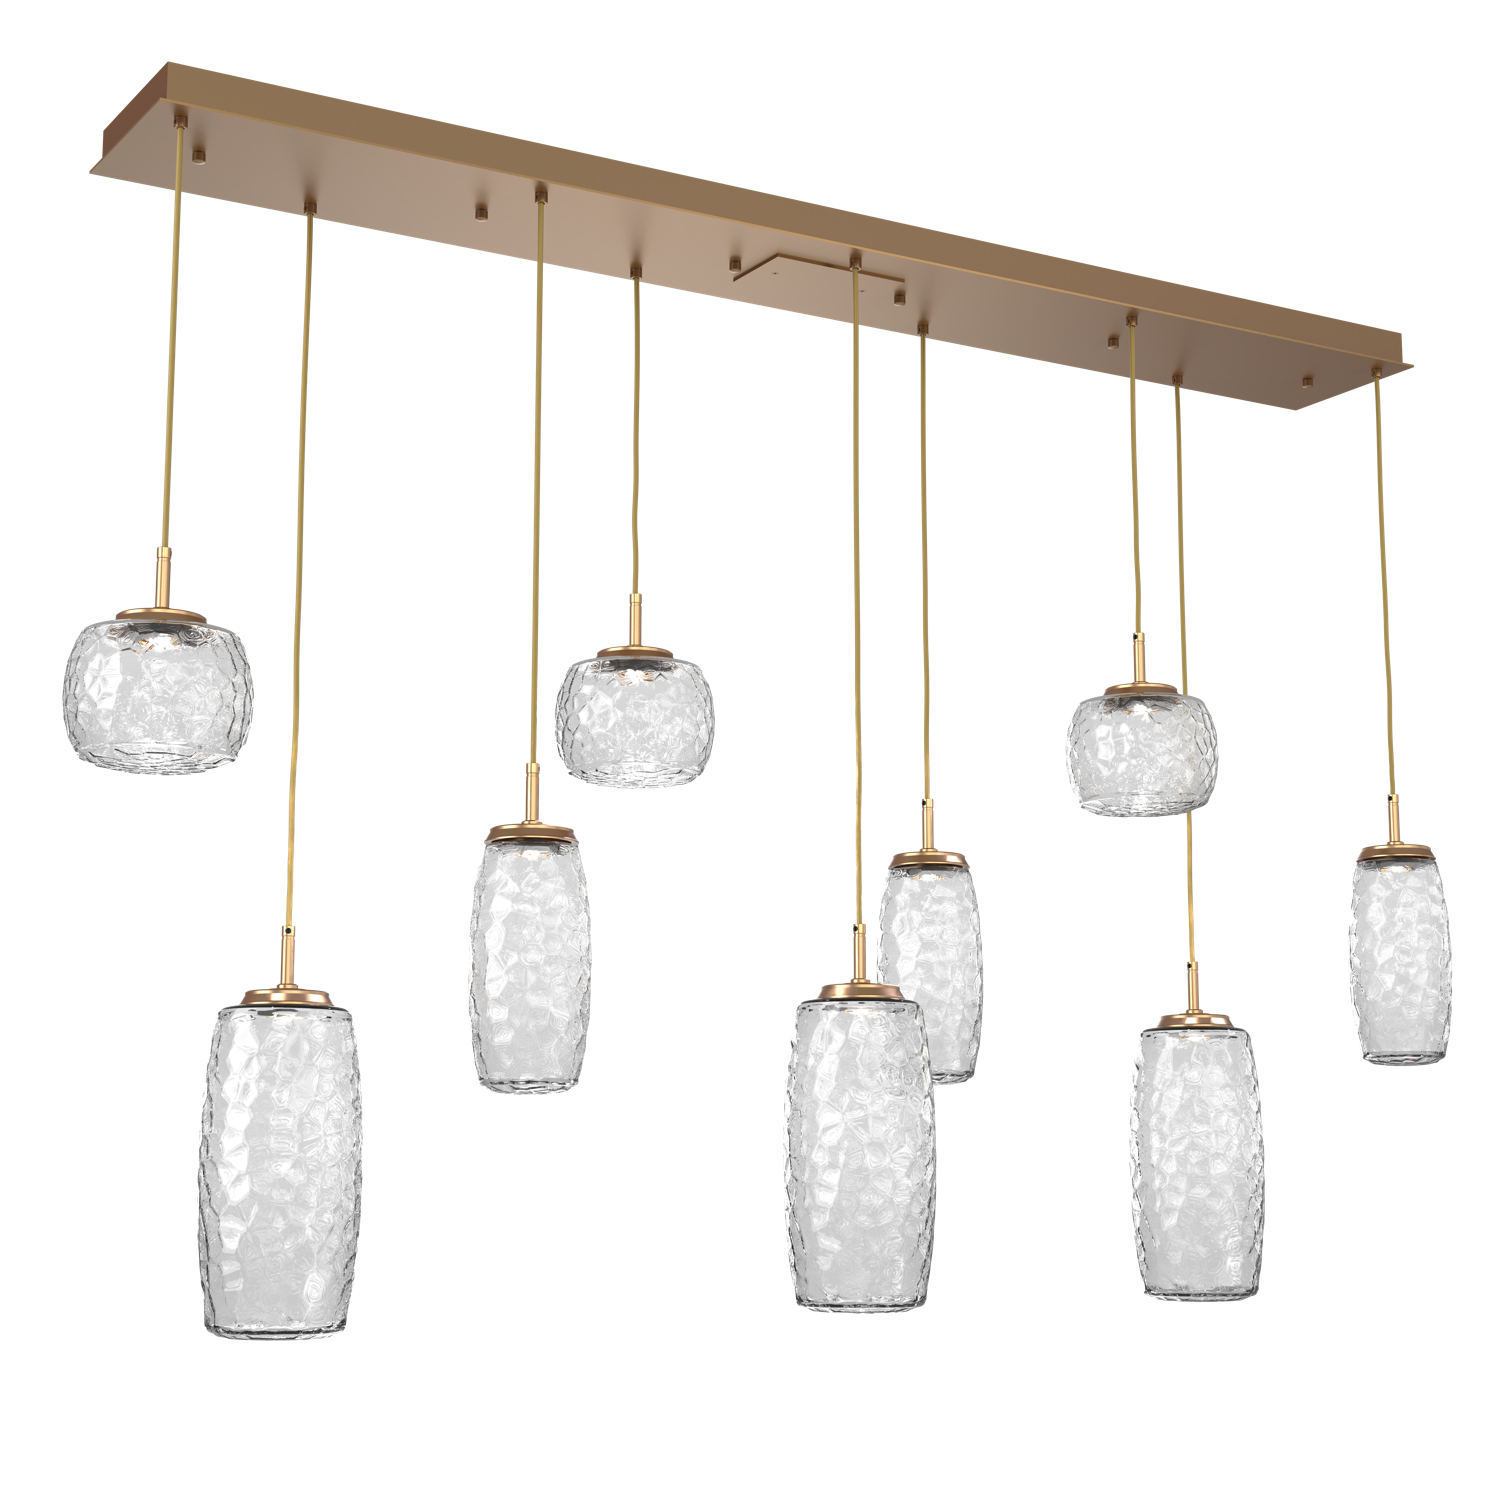 https://studio.hammerton.com/wp-content/uploads/sites/3/2023/09/PLB0091-09-NB-C-Hammerton-Studio-Vessel-9-light-linear-multi-pendant-chandelier-with-novel-brass-finish-and-clear-blown-glass-shades-and-LED-lamping.png